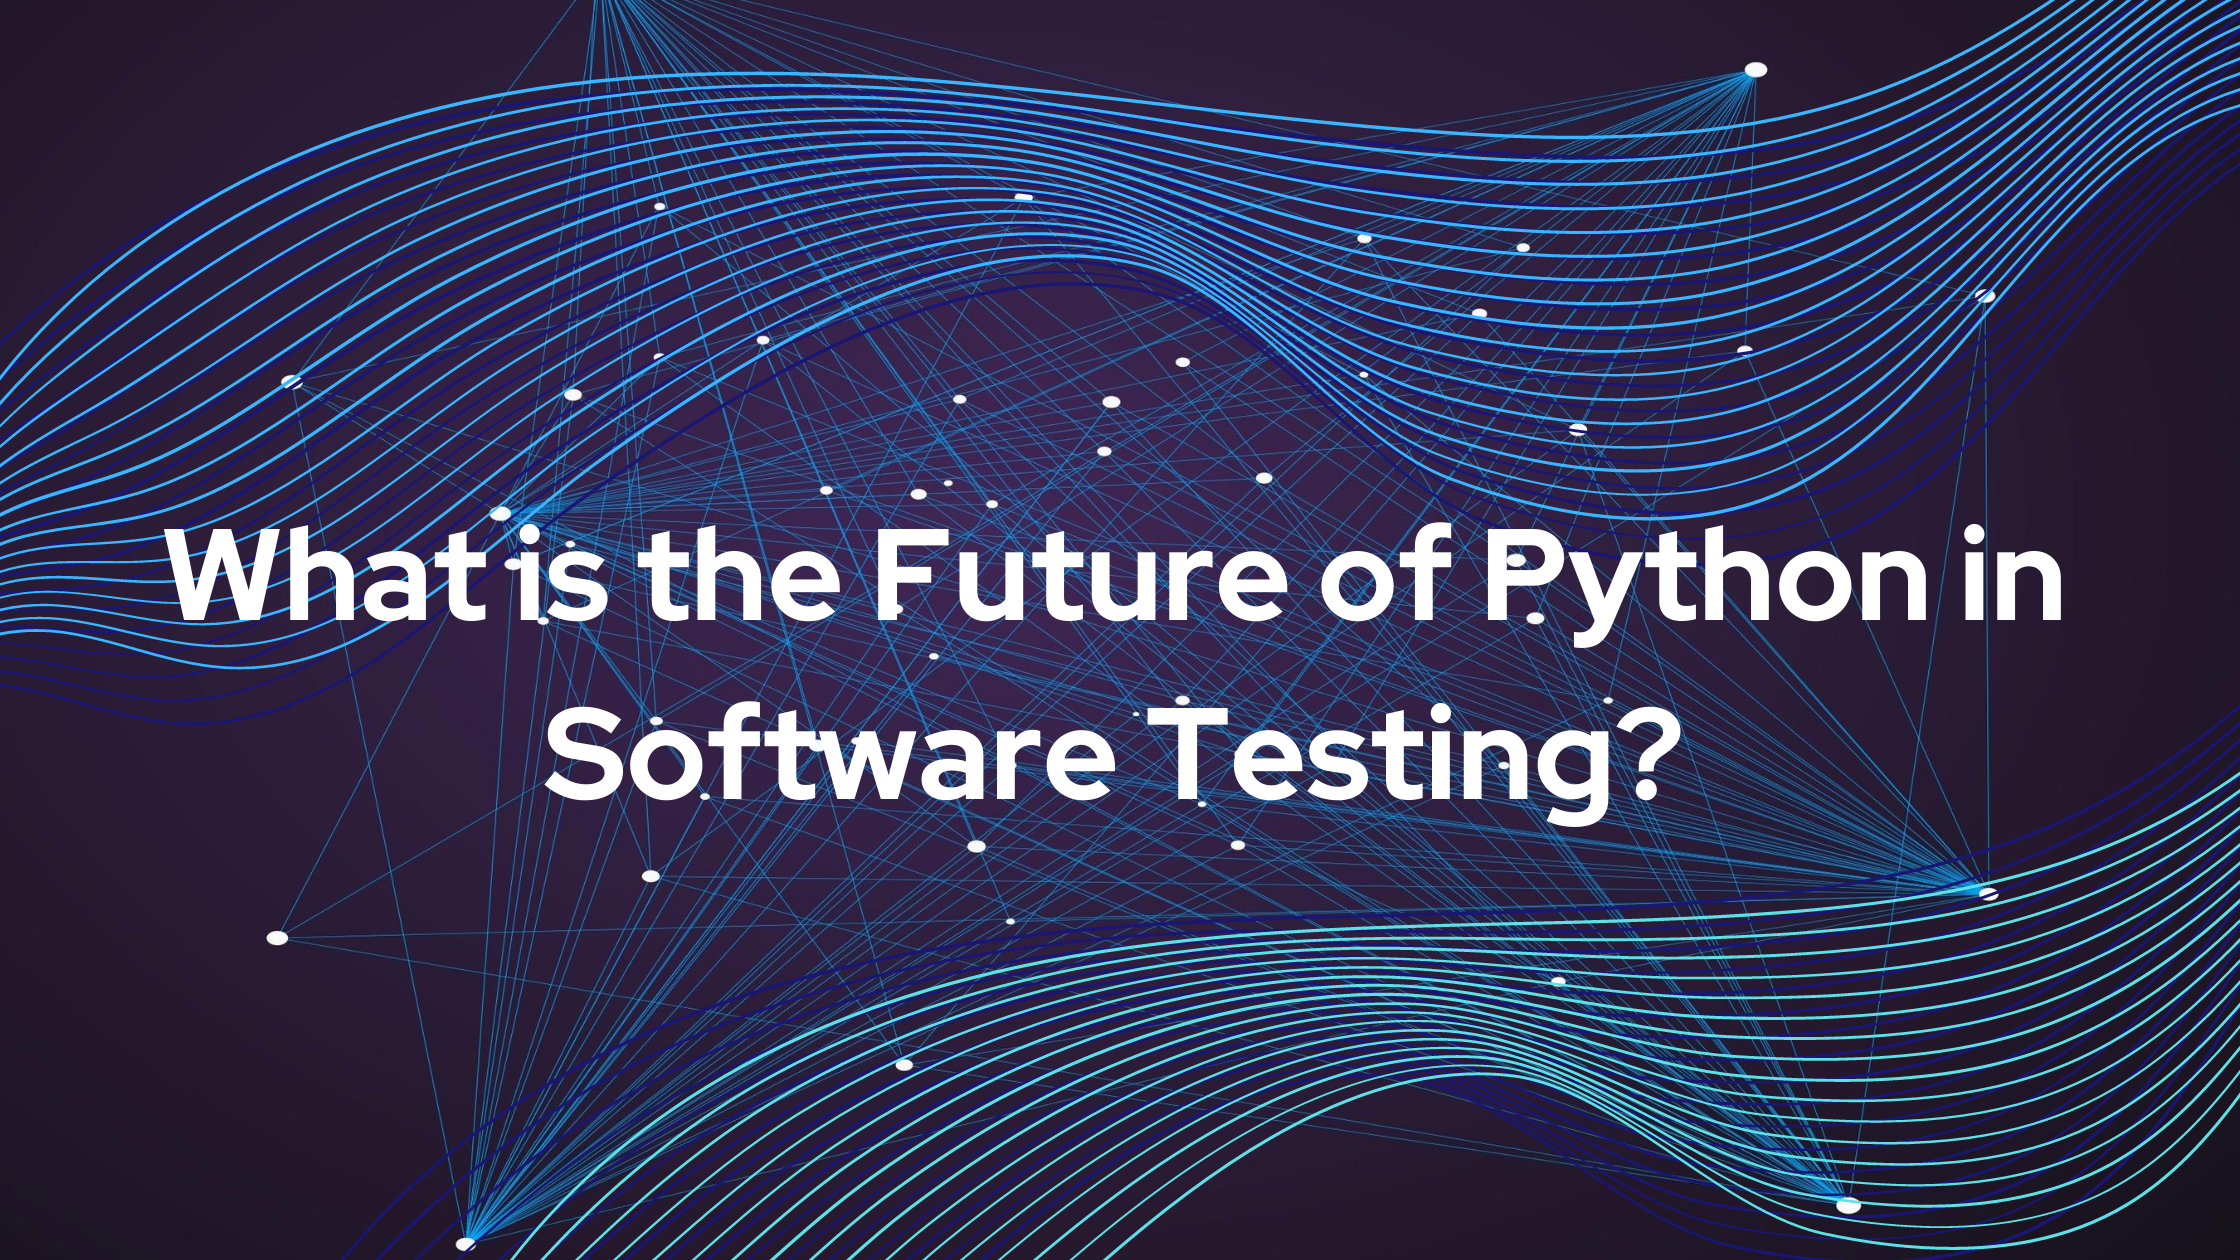 Future of Python in Software Testing